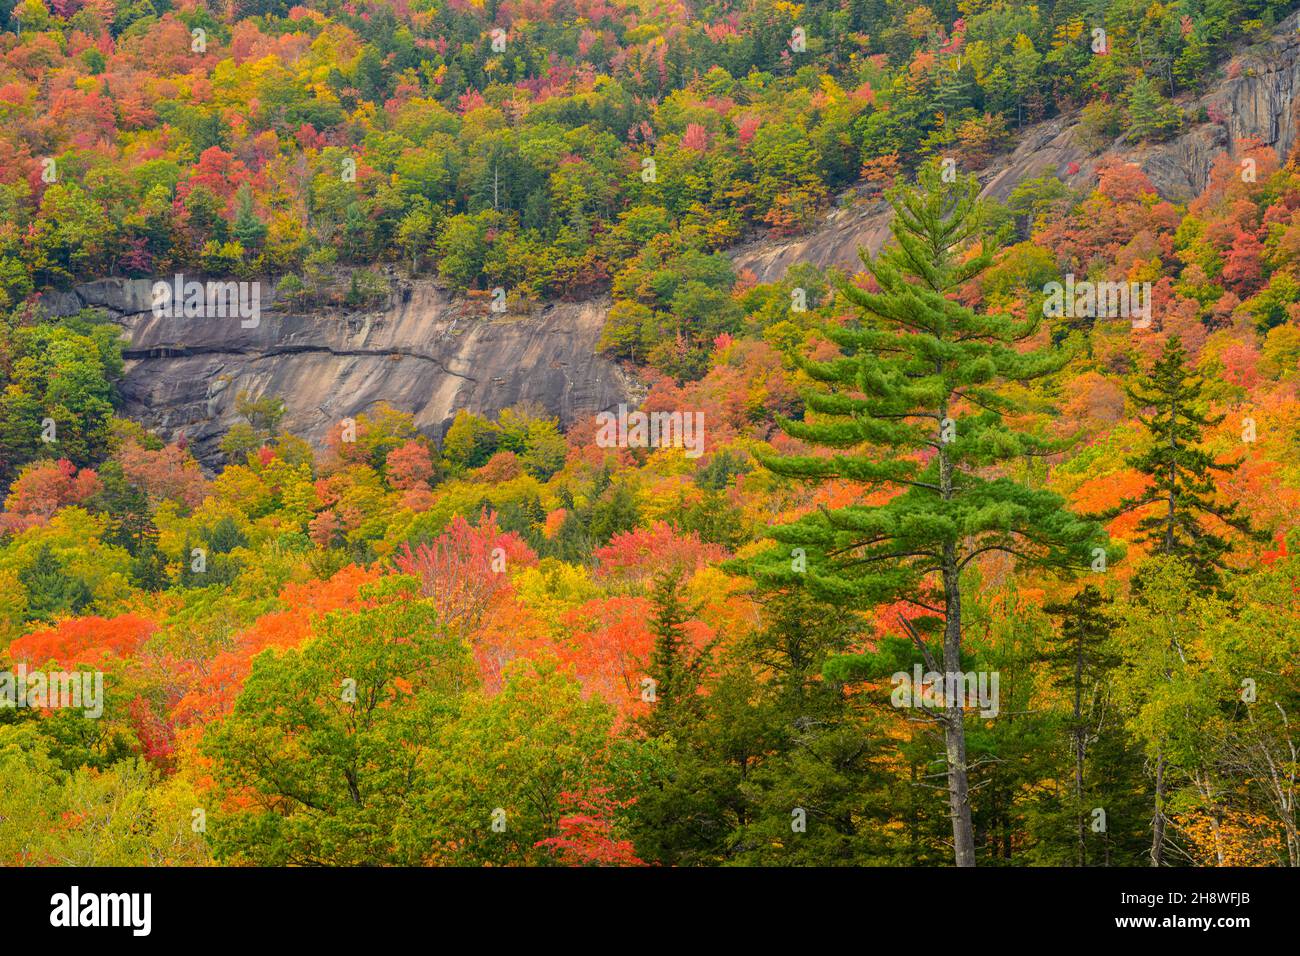 Autumn foliage in the deciduous forest on New England hillsides, Lower Falls scenic Area, Albany, New Hampshire, USA Stock Photo